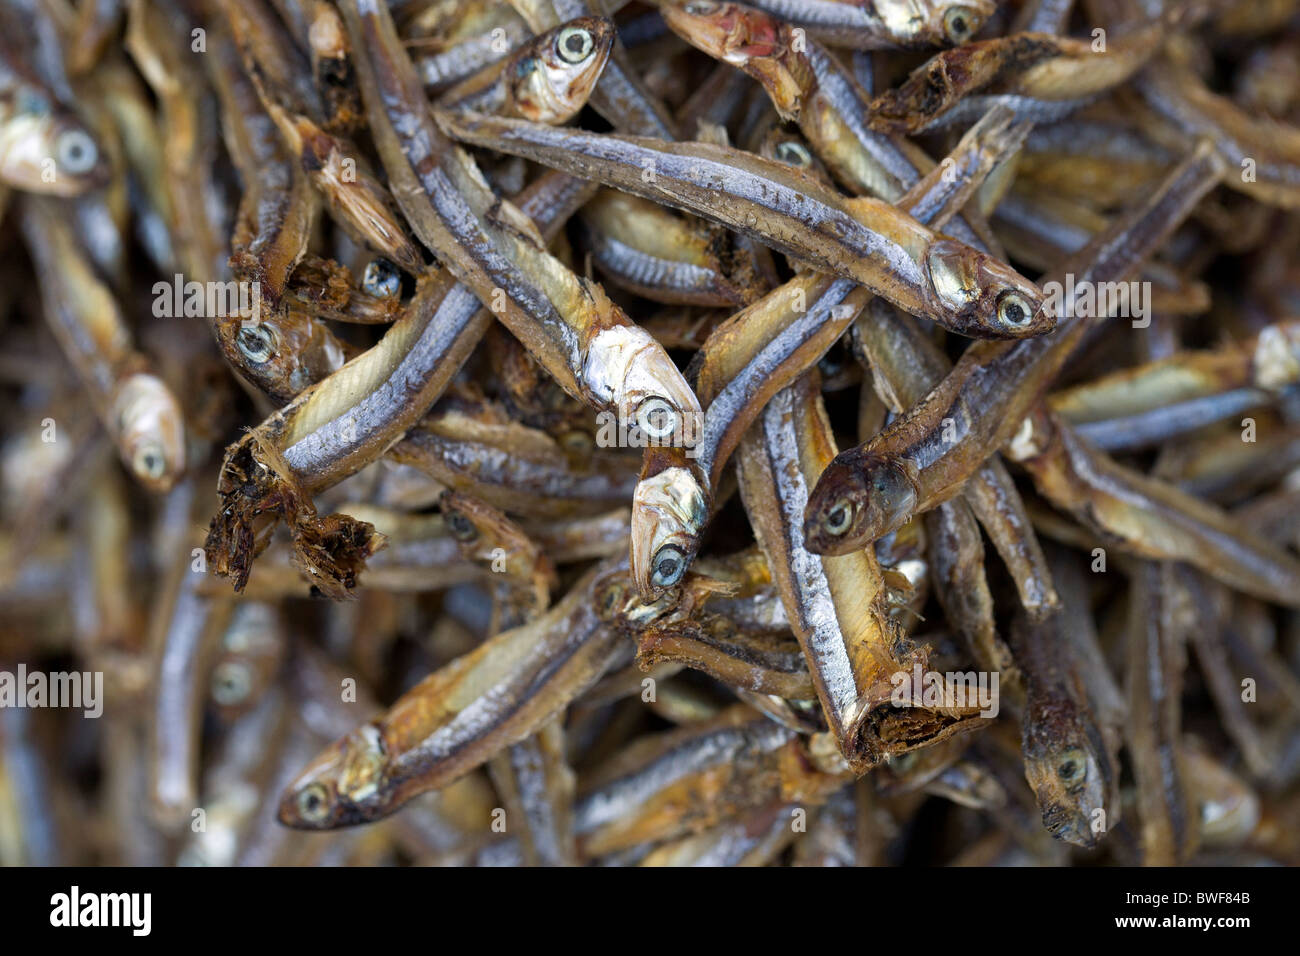 Tuyo, or dried fish, for sale at a market in Roxas, Oriental Mindoro, Philippines. Stock Photo